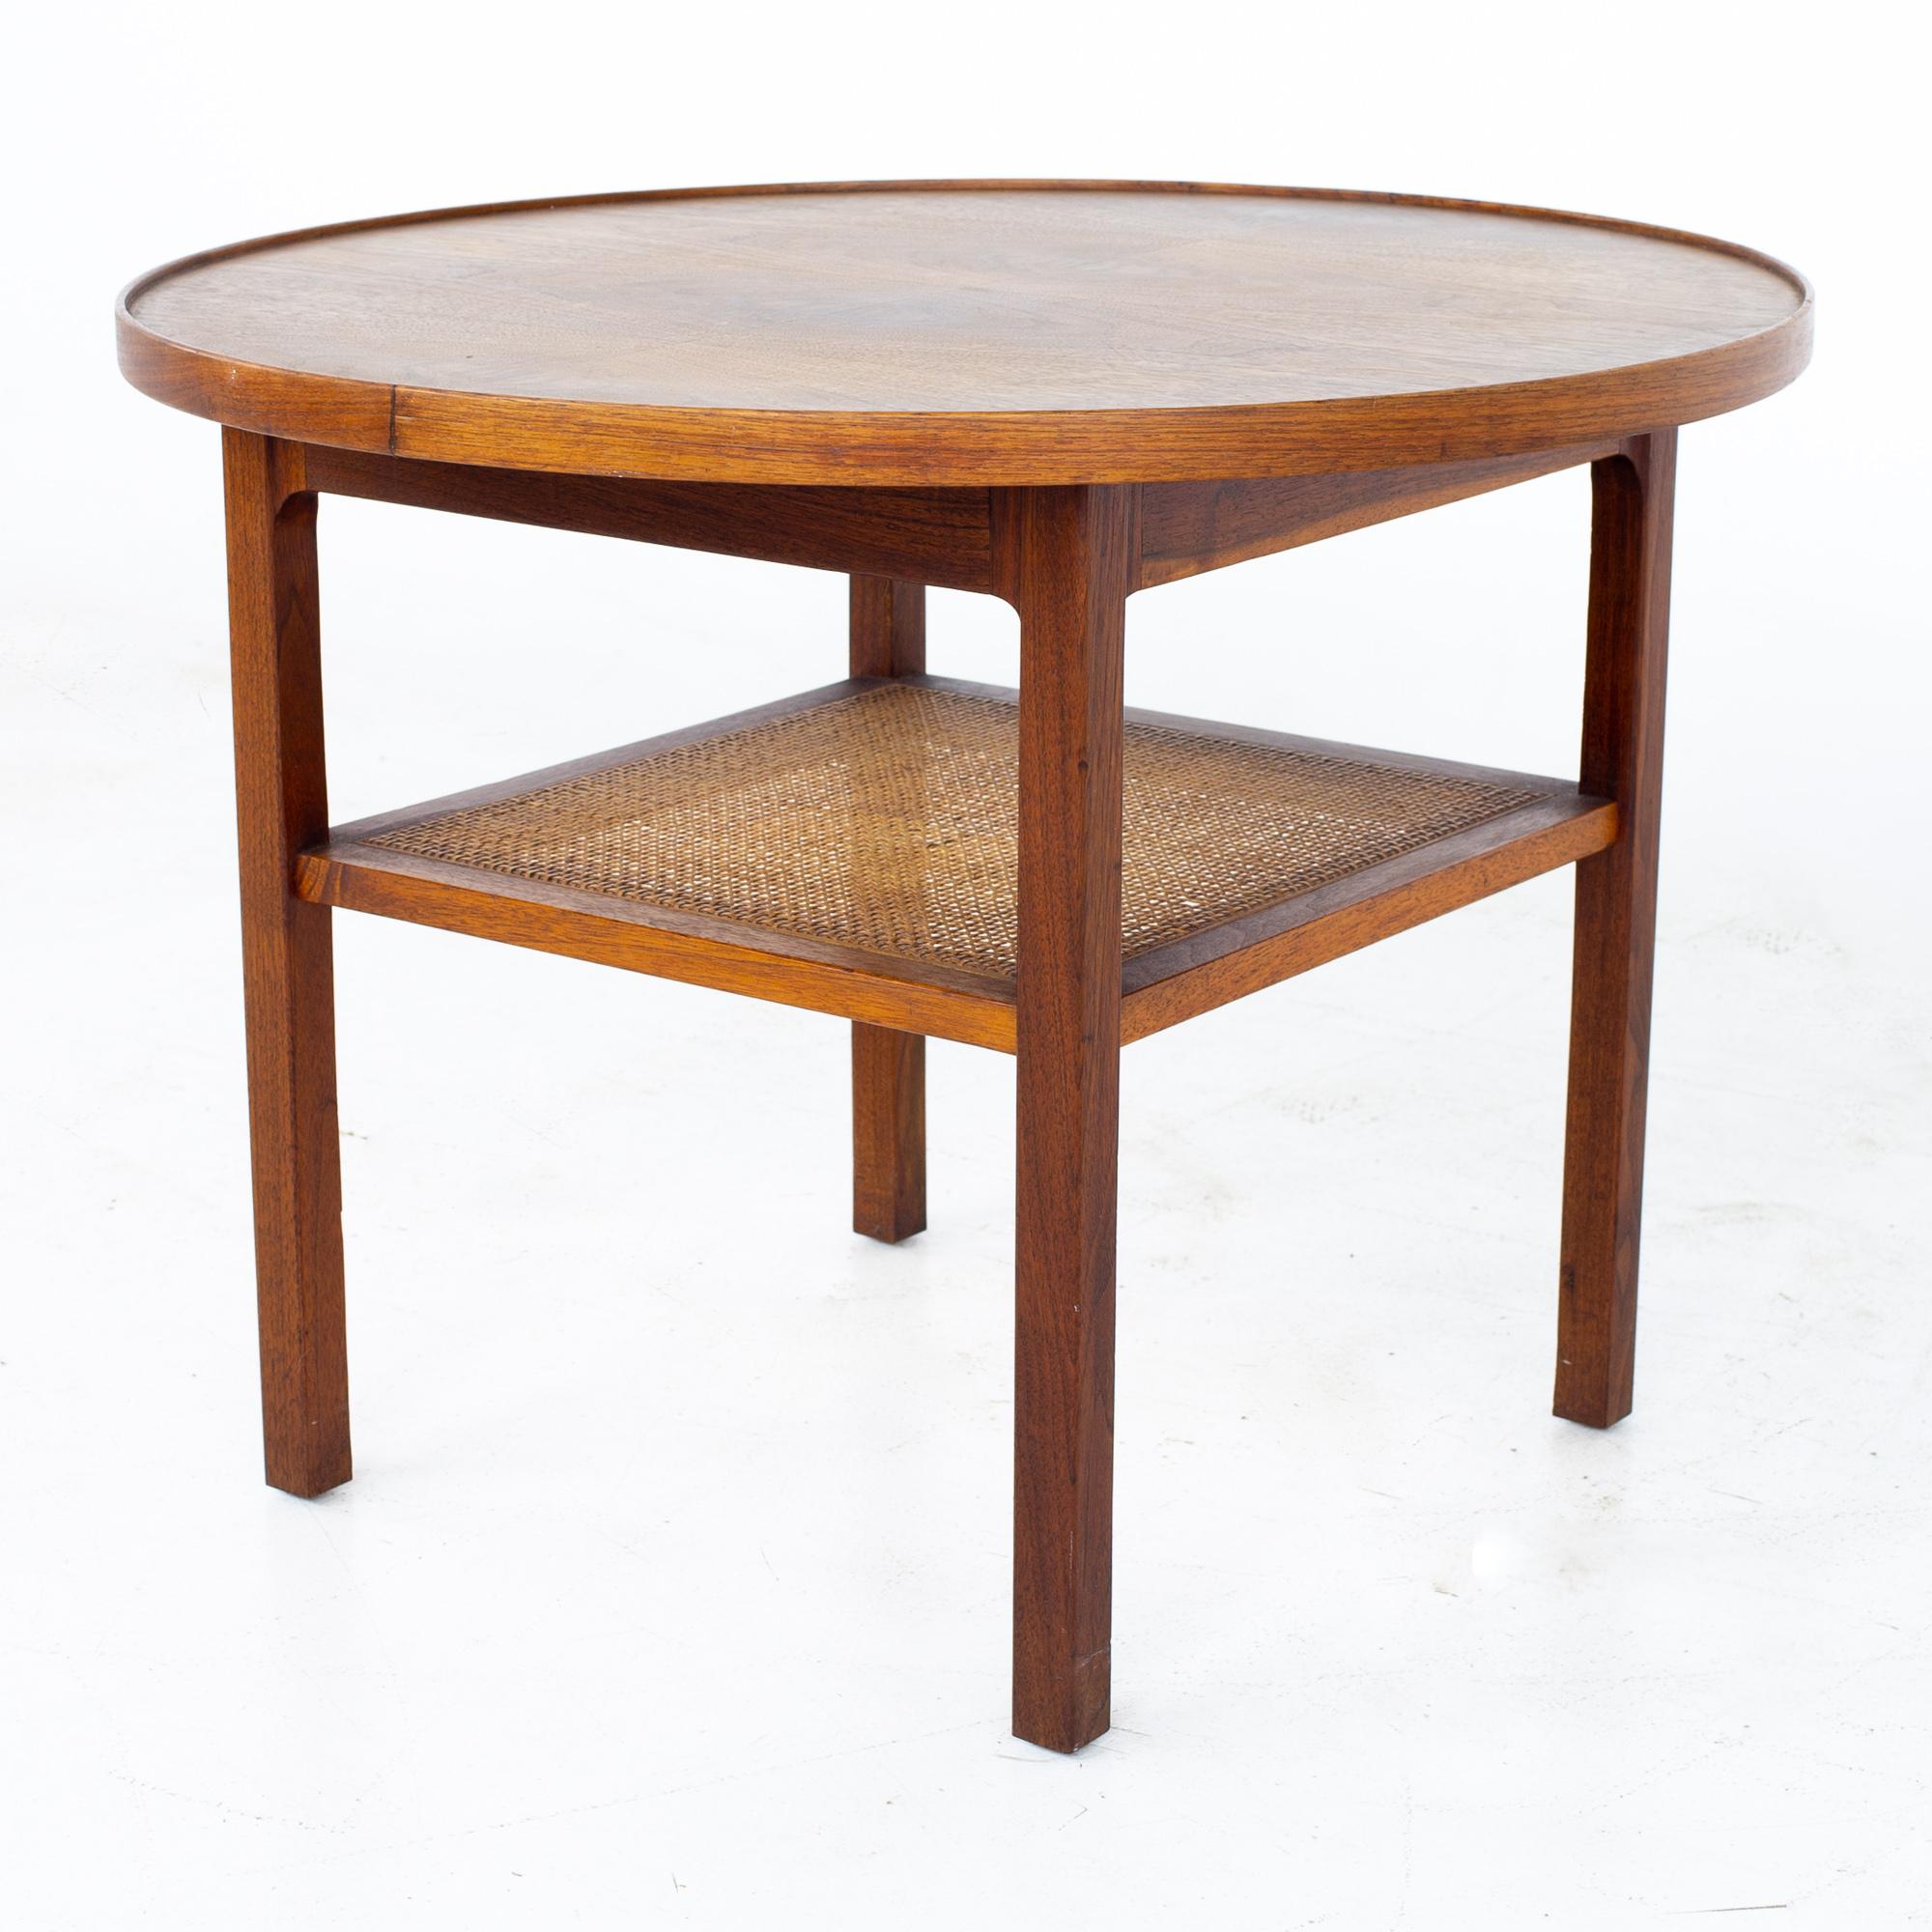 Jack Cartwright for Founders Mid Century Round Side End Table with Cane Shelf
Table measures: 27 wide x 27 deep x 20.5 inches high

All pieces of furniture can be had in what we call restored vintage condition. That means the piece is restored upon